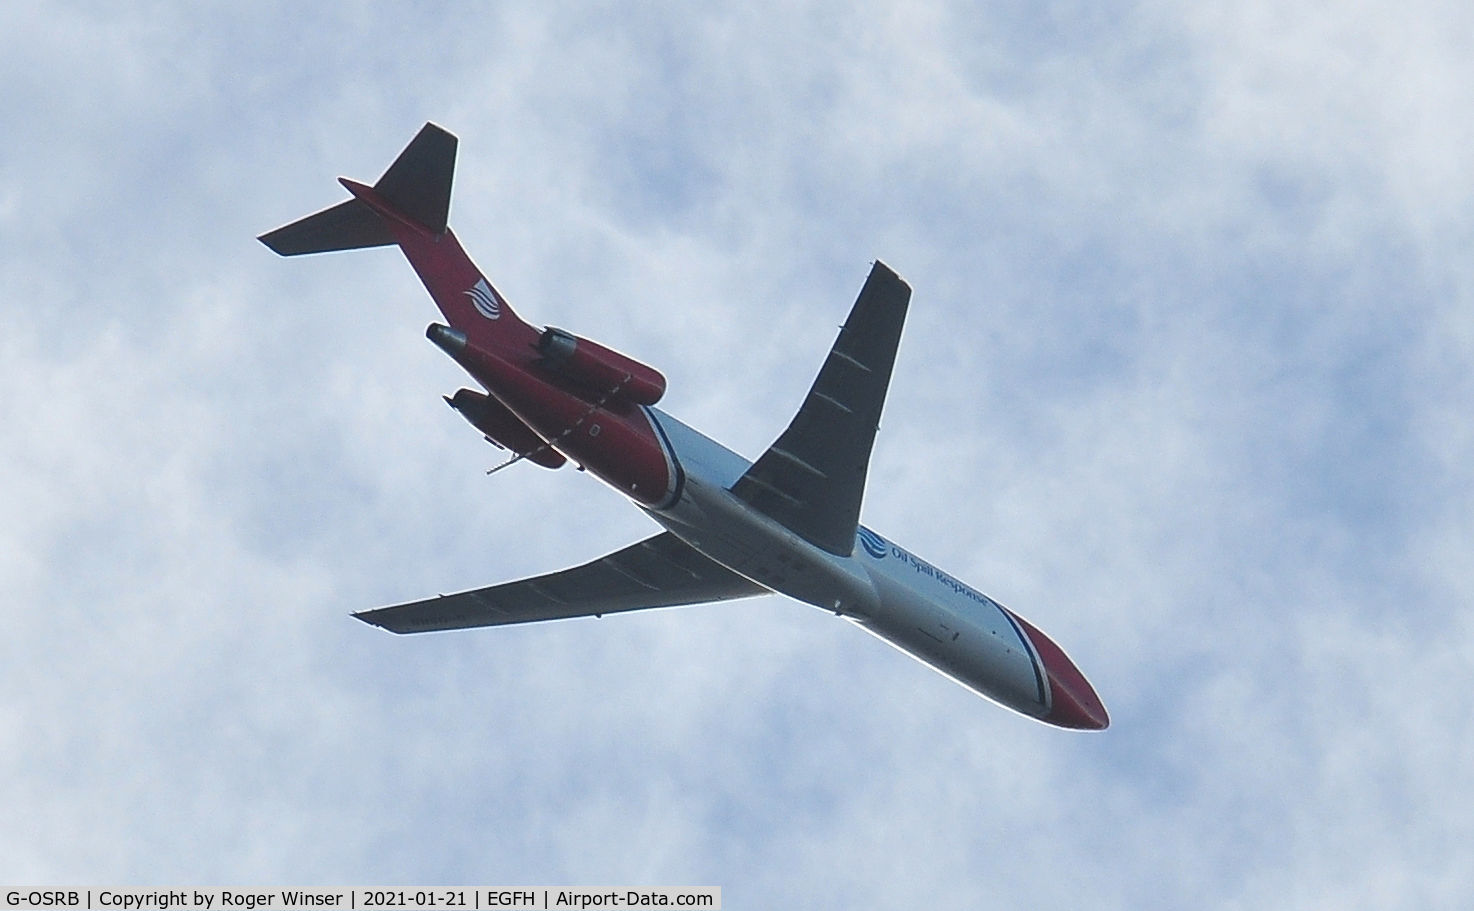 G-OSRB, 1983 Boeing 727-2S2F C/N 22929, SW bound at 7600 feet. Oil spill response aircraft operated by 2Excel Aviation.